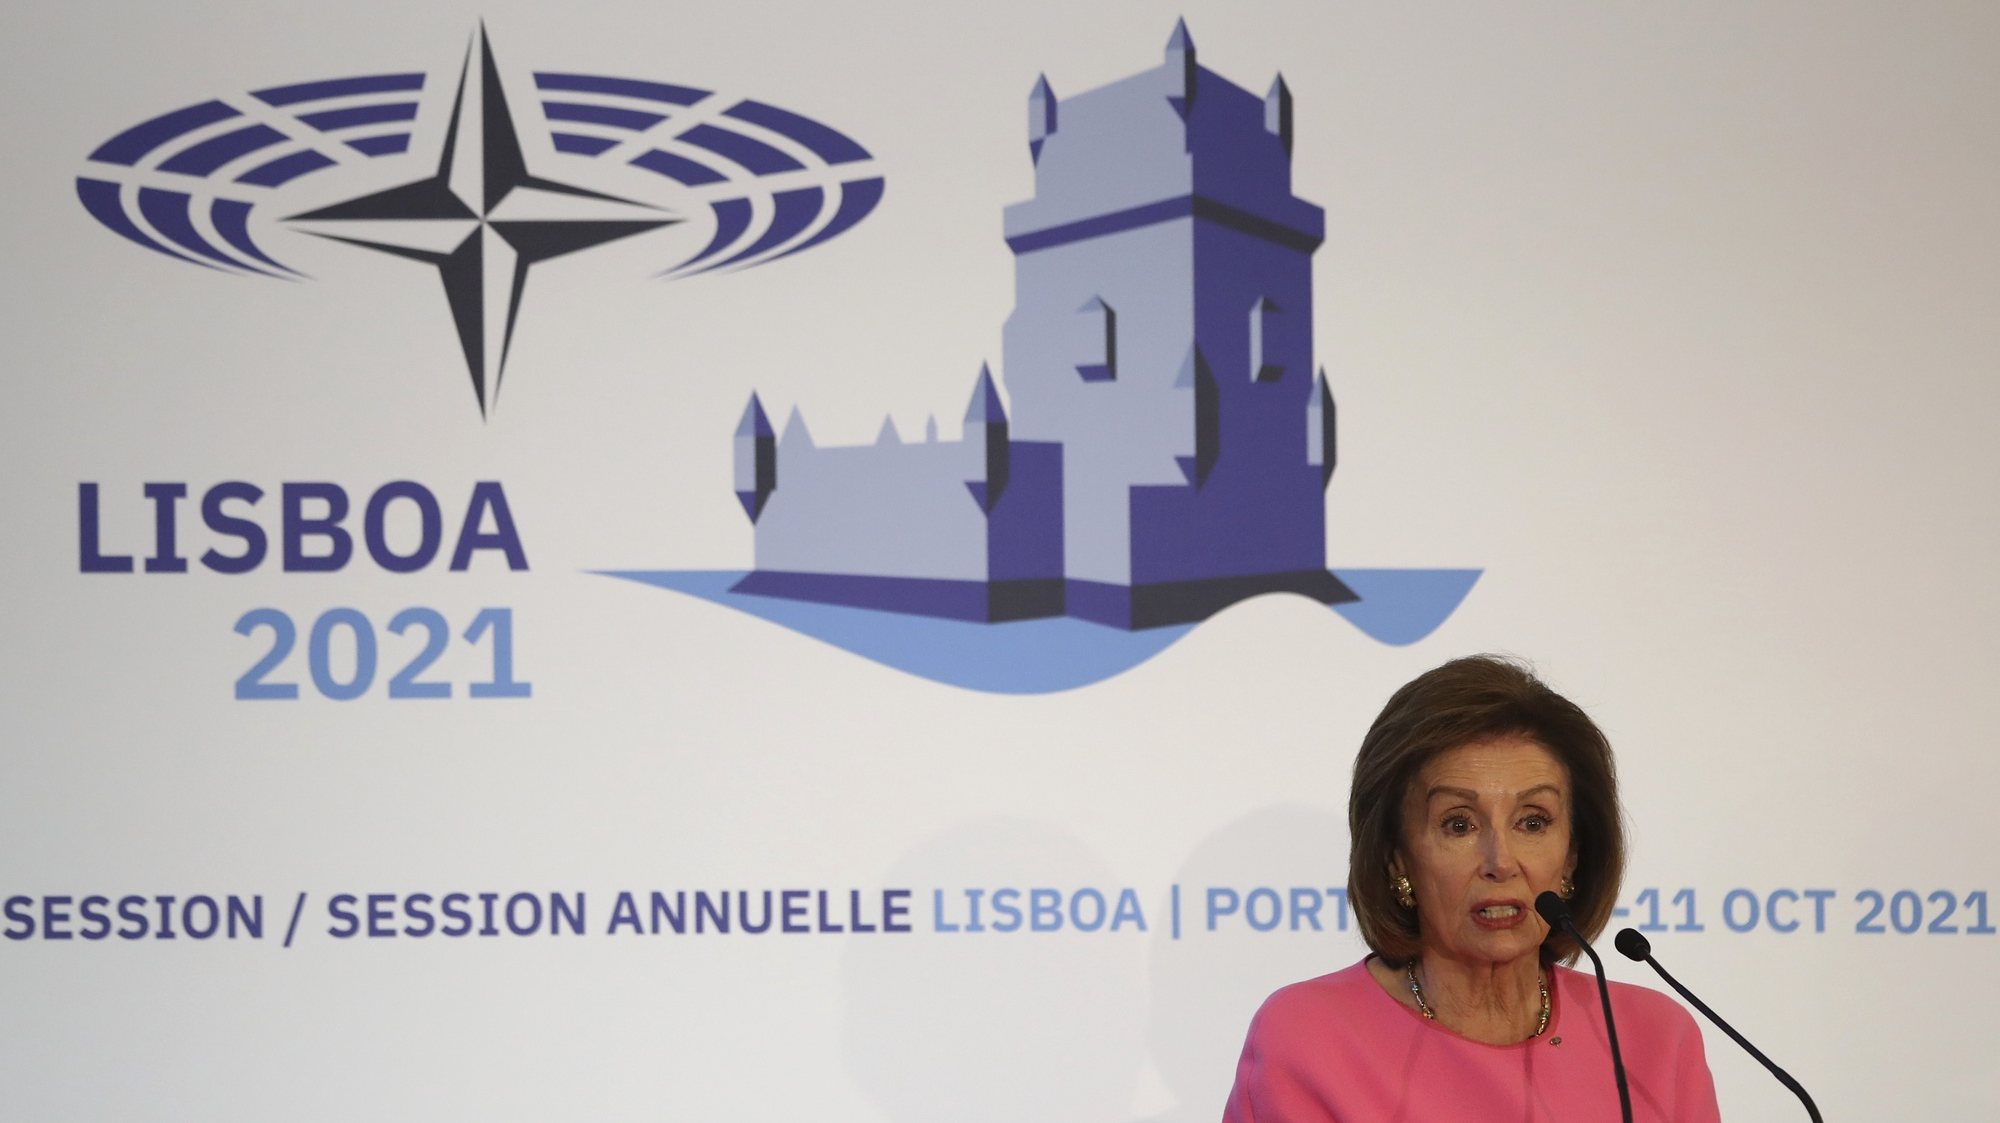 Nancy Pelosi, Speaker of United States House of Representatives, delivers a speech during the closing ceremony of the 67th Annual Session of the NATO Parliamentary Assembly (NPA) being held between 08 and 11st october in Lisbon, Portugal, 11 October 2021.  MANUEL DE ALMEIDA/LUSA